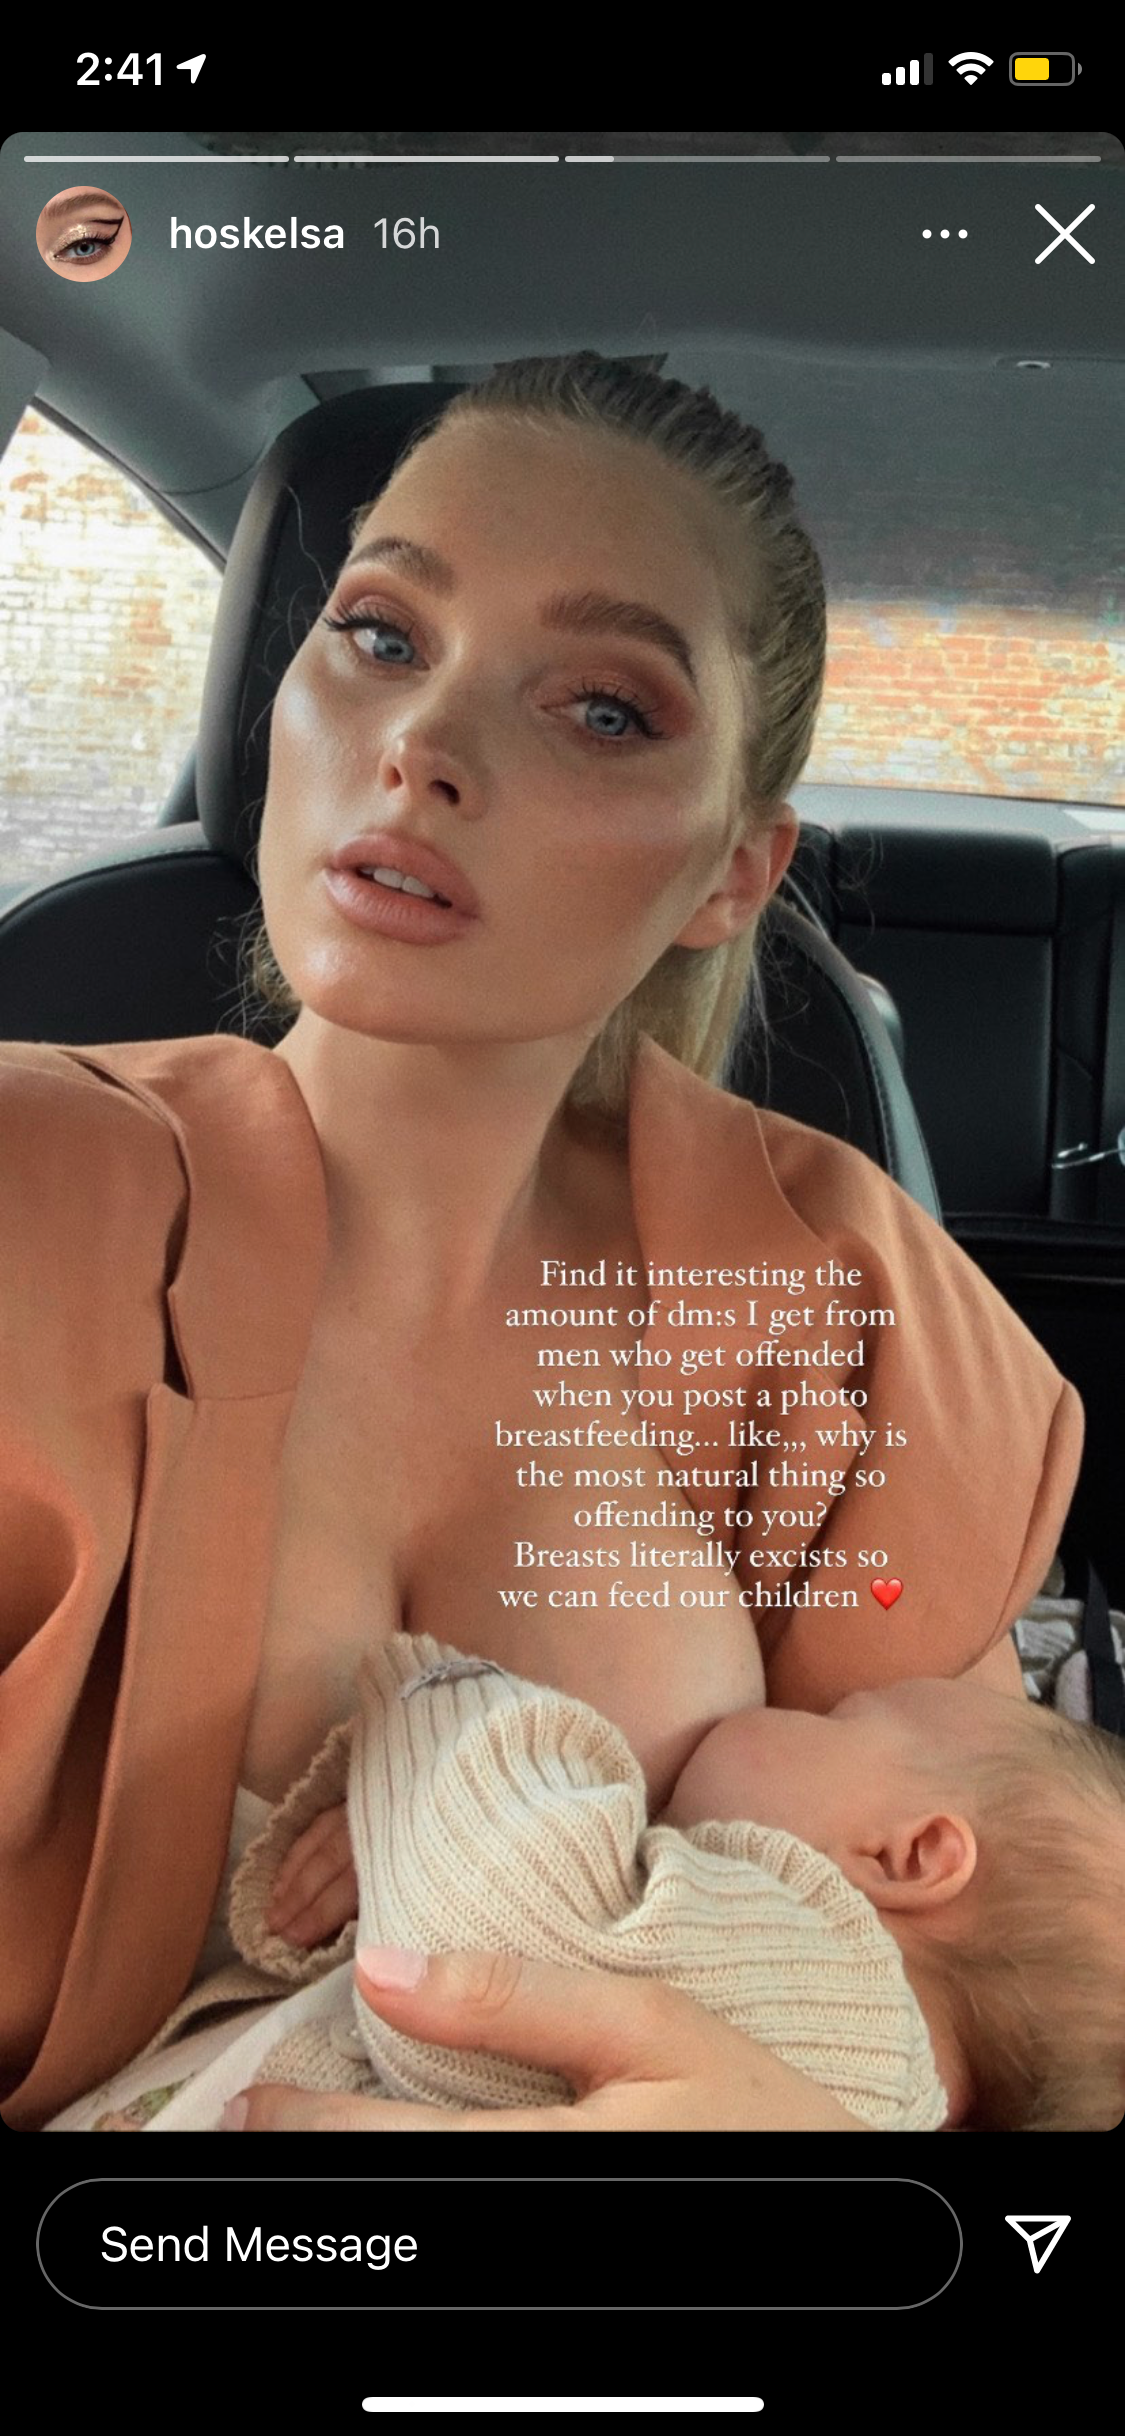 Elsa Hosk says she received DMs from men offended by her breastfeeding photos